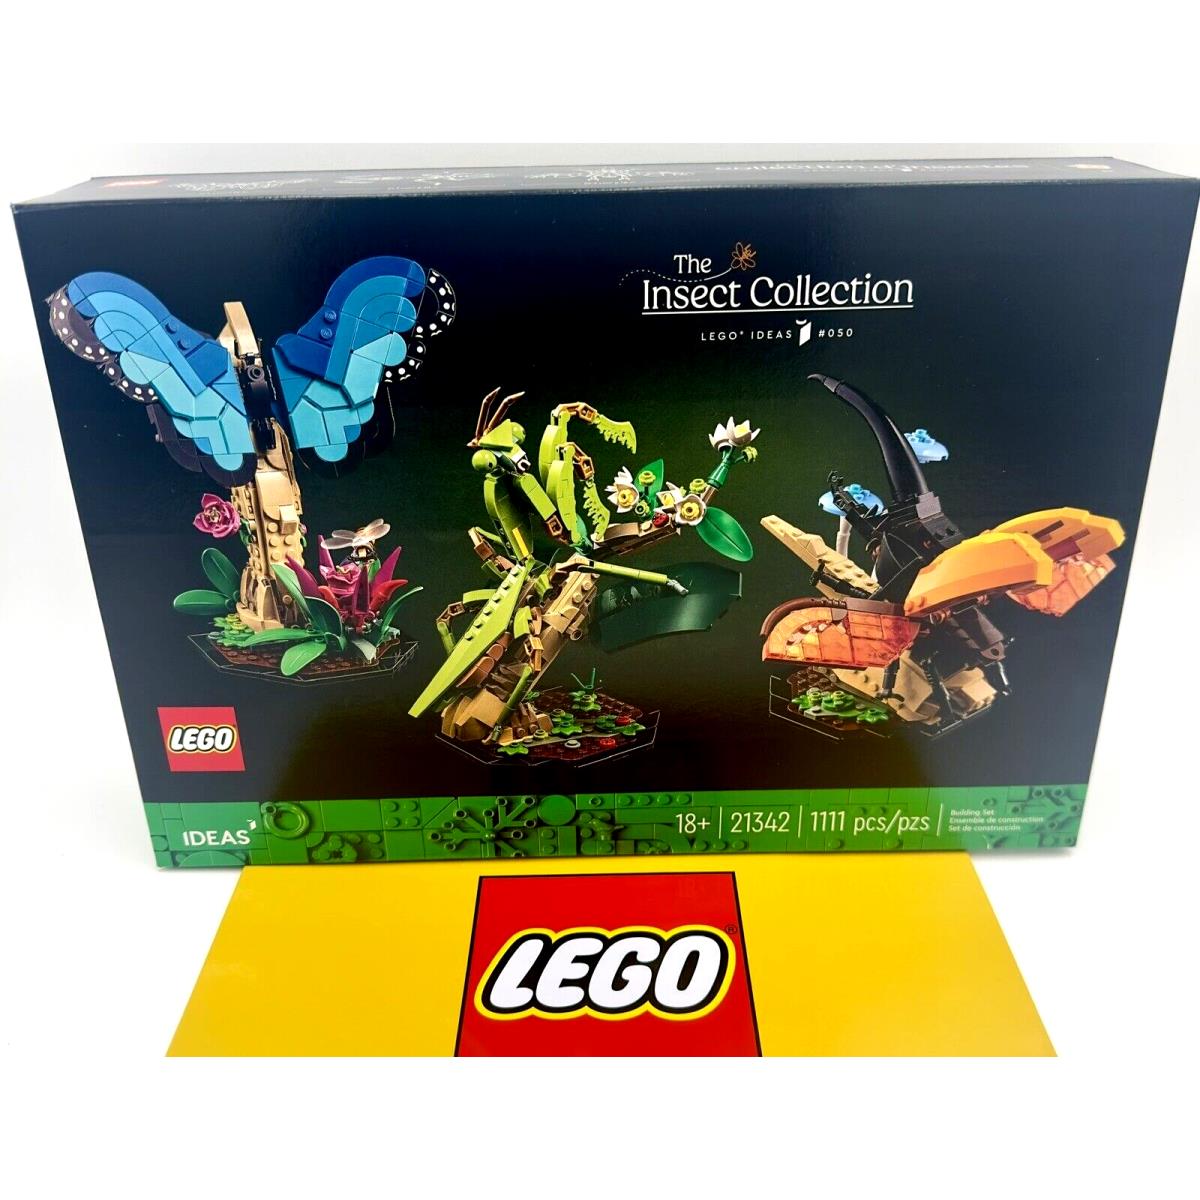 Lego 21342 Ideas 0050 The Insect Collection